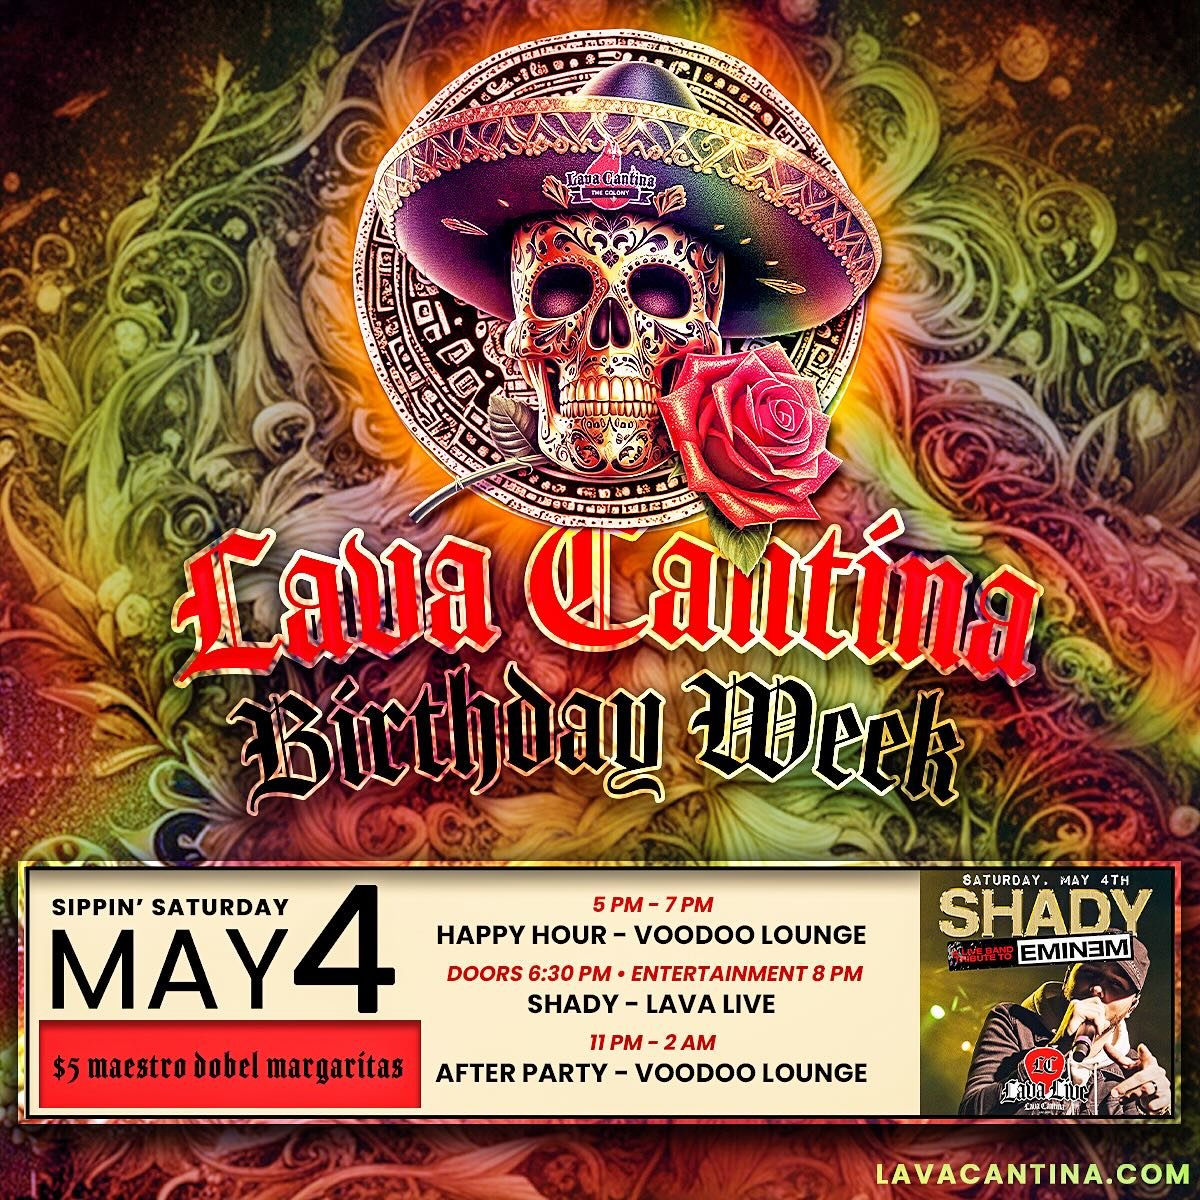 🚨 BIRTHDAY WEEK @lavacantinac 🚨

🎉🥳🔥🎉🥳🔥 - GET YOUR TIX NOW!
🎟️🎟️➡️ LavaCantina.com

SIPPIN&rsquo; SATURDAY - May 4th
🪇$5 Maestro Dobel Margaritas🪇
Happy Hour 5 PM - 7 PM
SHADY - Eminem Tribute
🔥Lava Live at Lava Cantina
Doors 6:30 PM | E